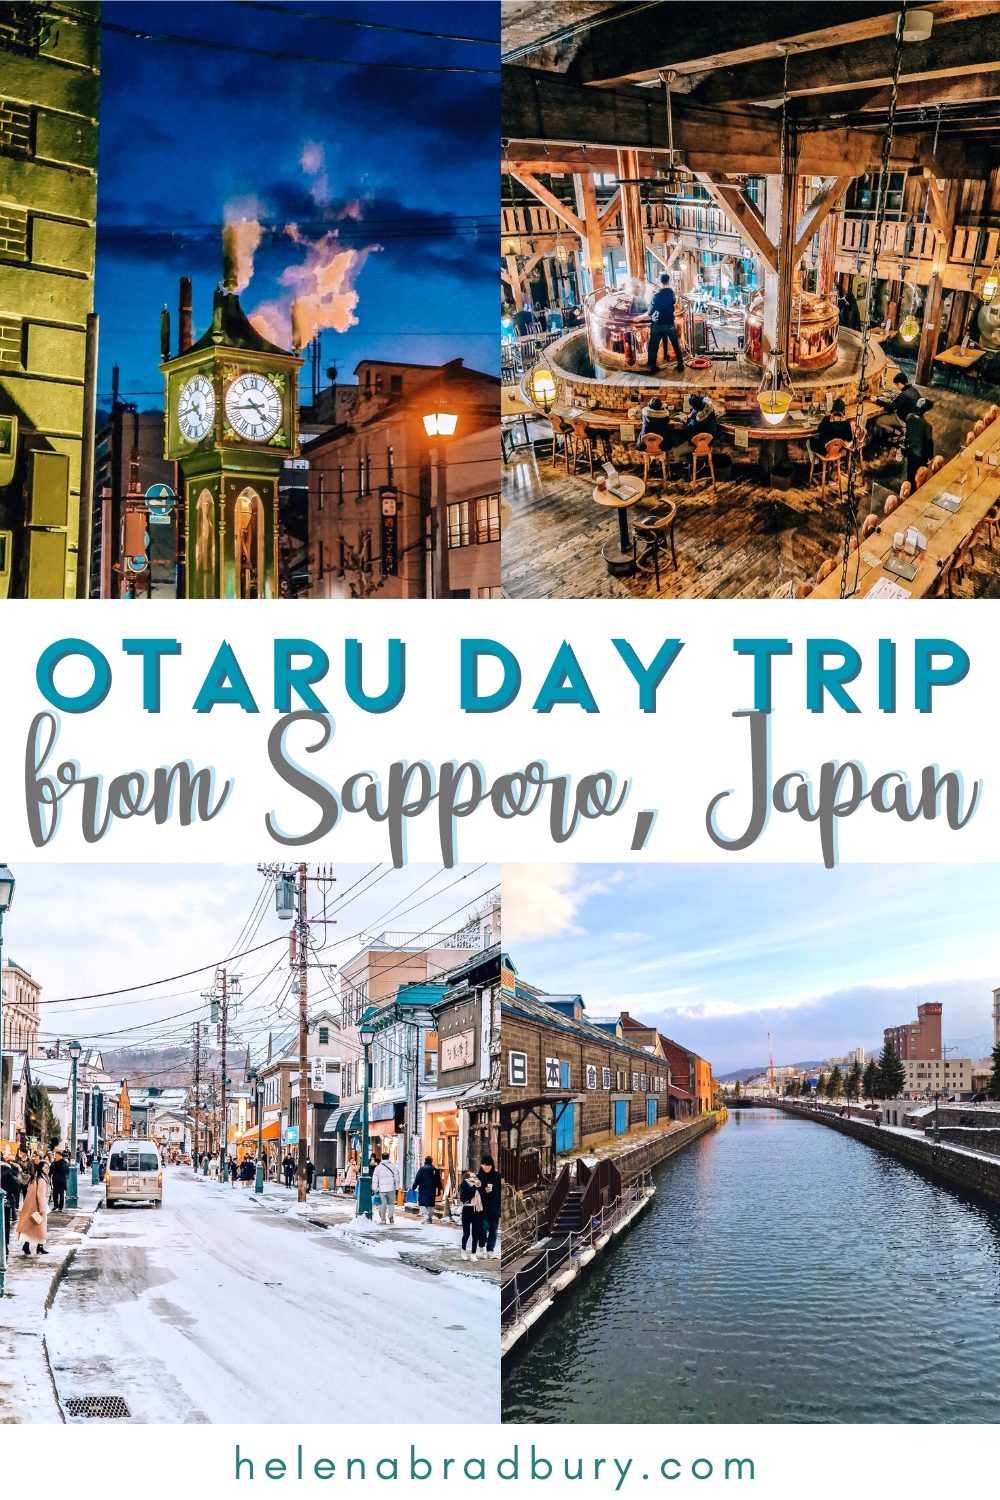 Explore beyond Sapporo with this Sapporo to Otaru day trip itinerary, from free sake tastings to glass-blowing workshops, this is the best Otaru itinerary. | otaru best things to do  | otaru japan itinerary | otaru music box museum | sapporo day trip